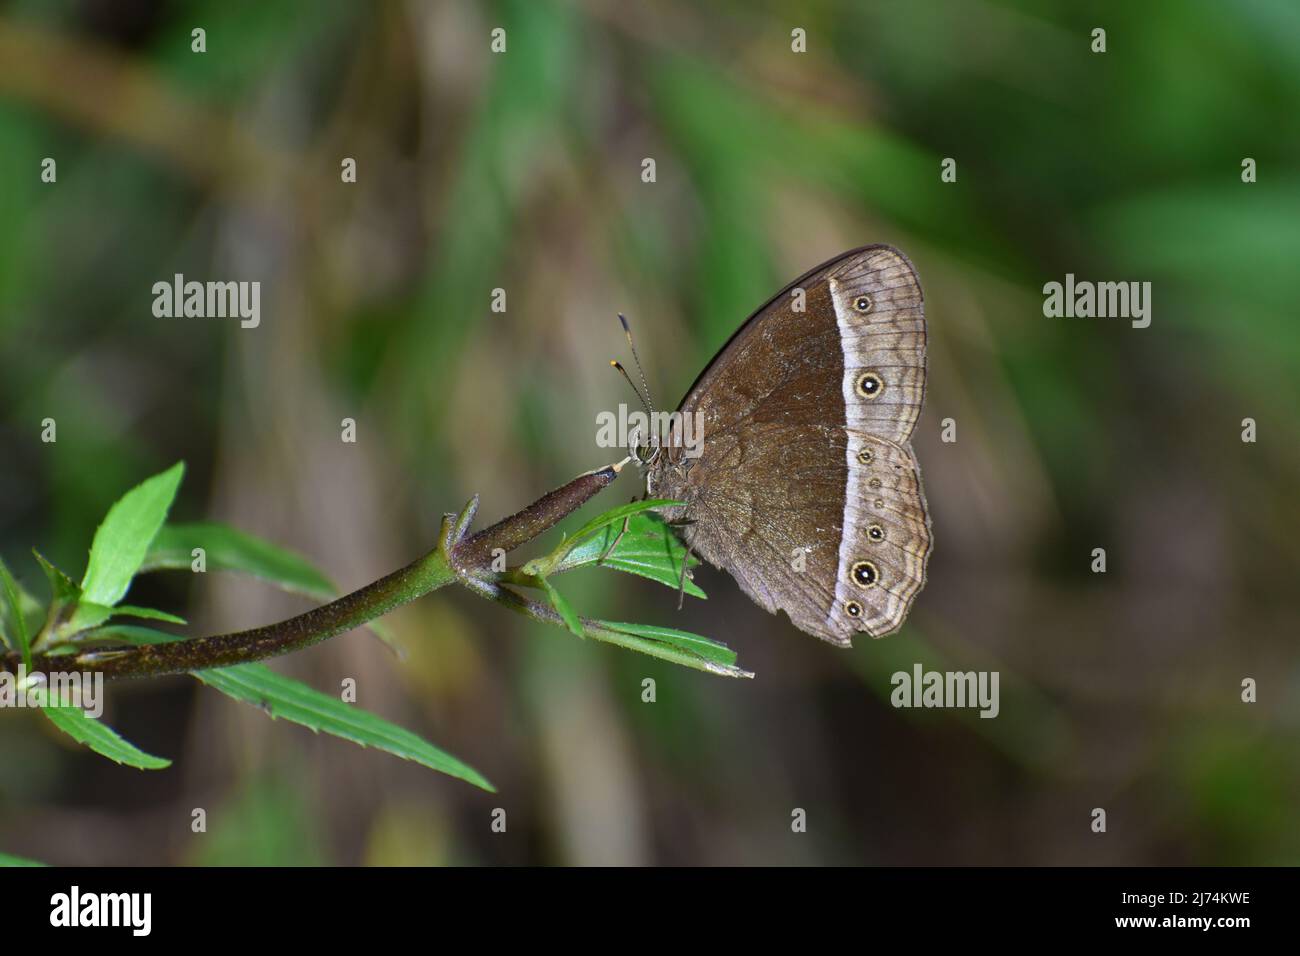 Bushbrowns butterfly found in Mount Merapi National Park, Indonesia. Stock Photo